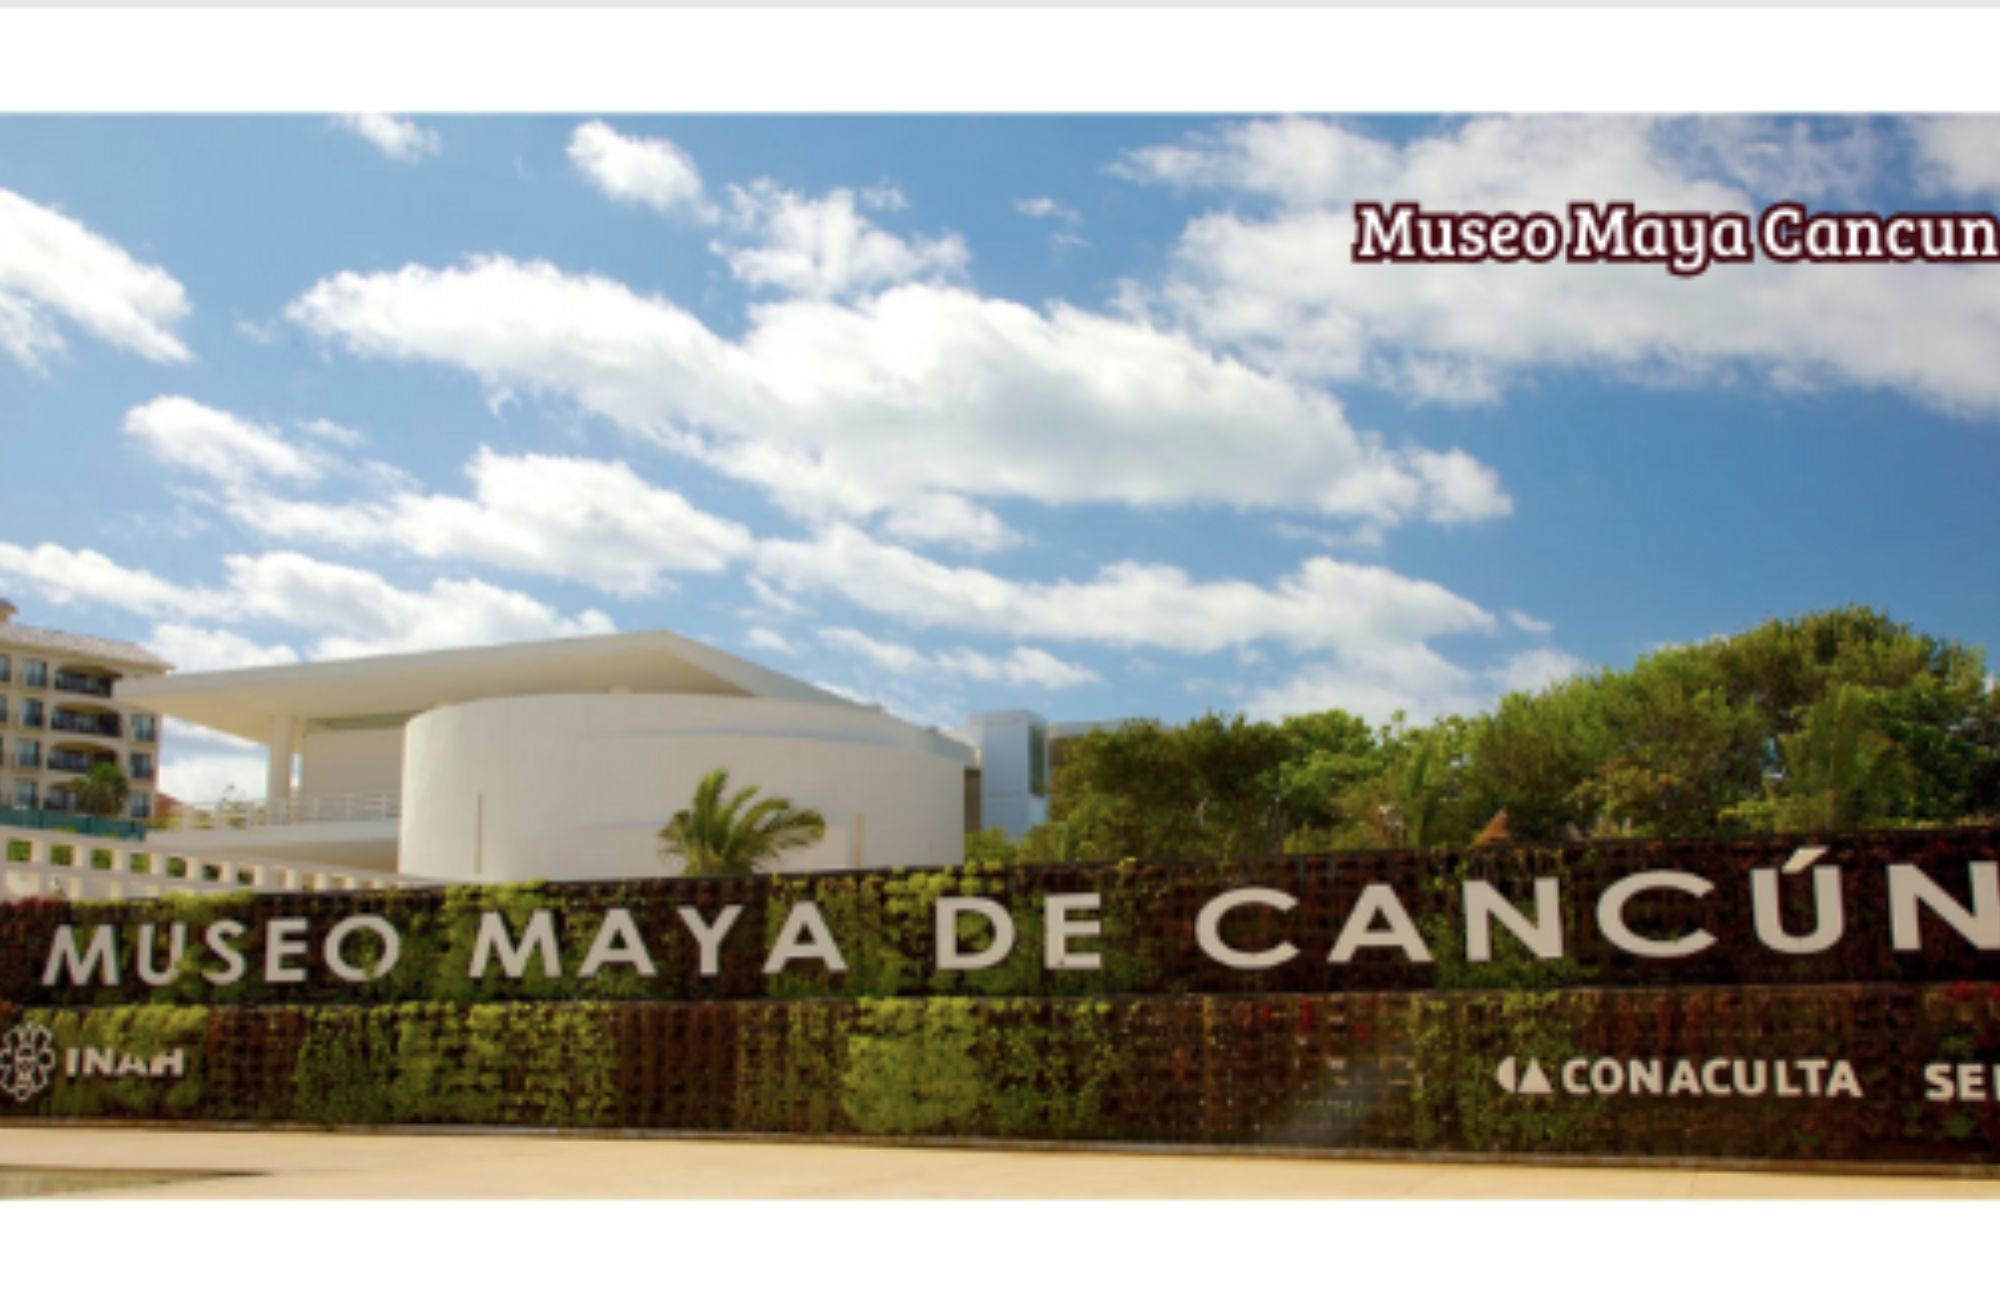 Condominium with business center, Pet park, pool, pre-construction, Colosio Boulevard for sale, Cancún.